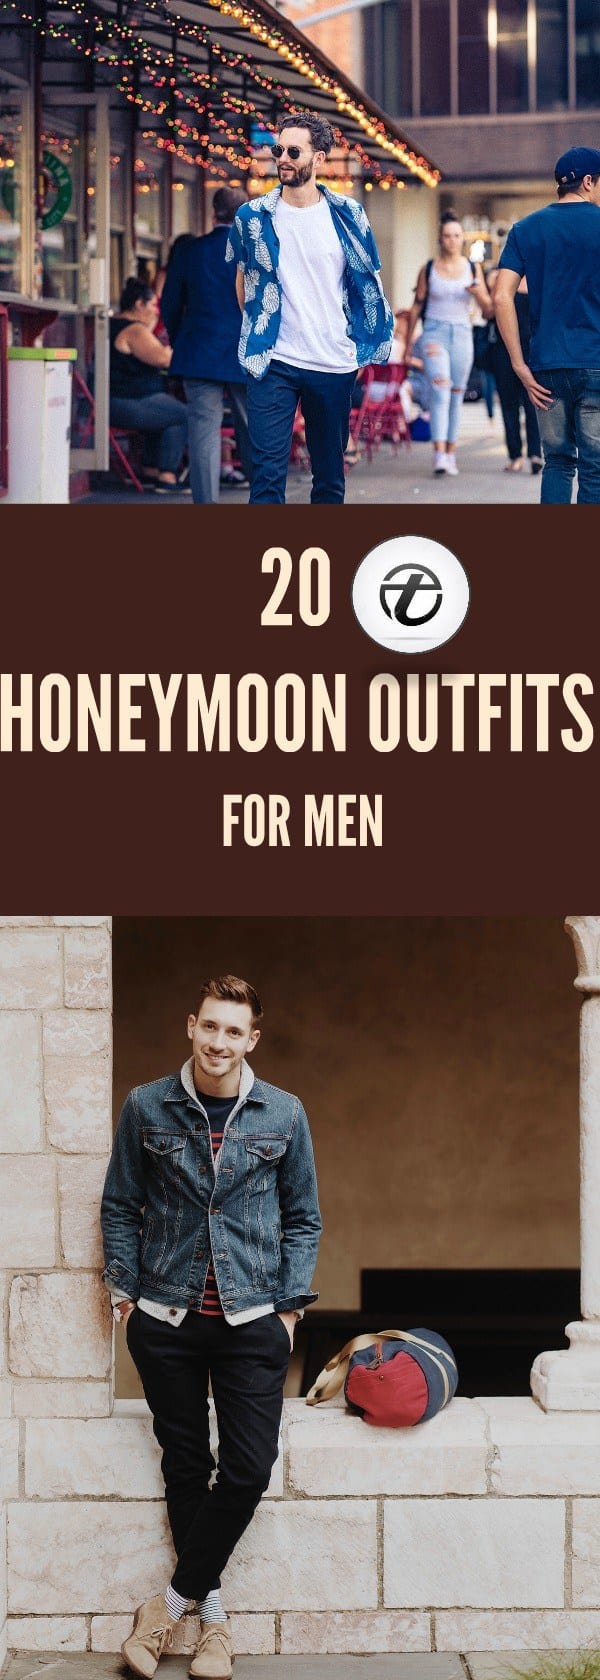 Men Honeymoon Outfits-20 Men's Outfits to Pack for Honeymoon